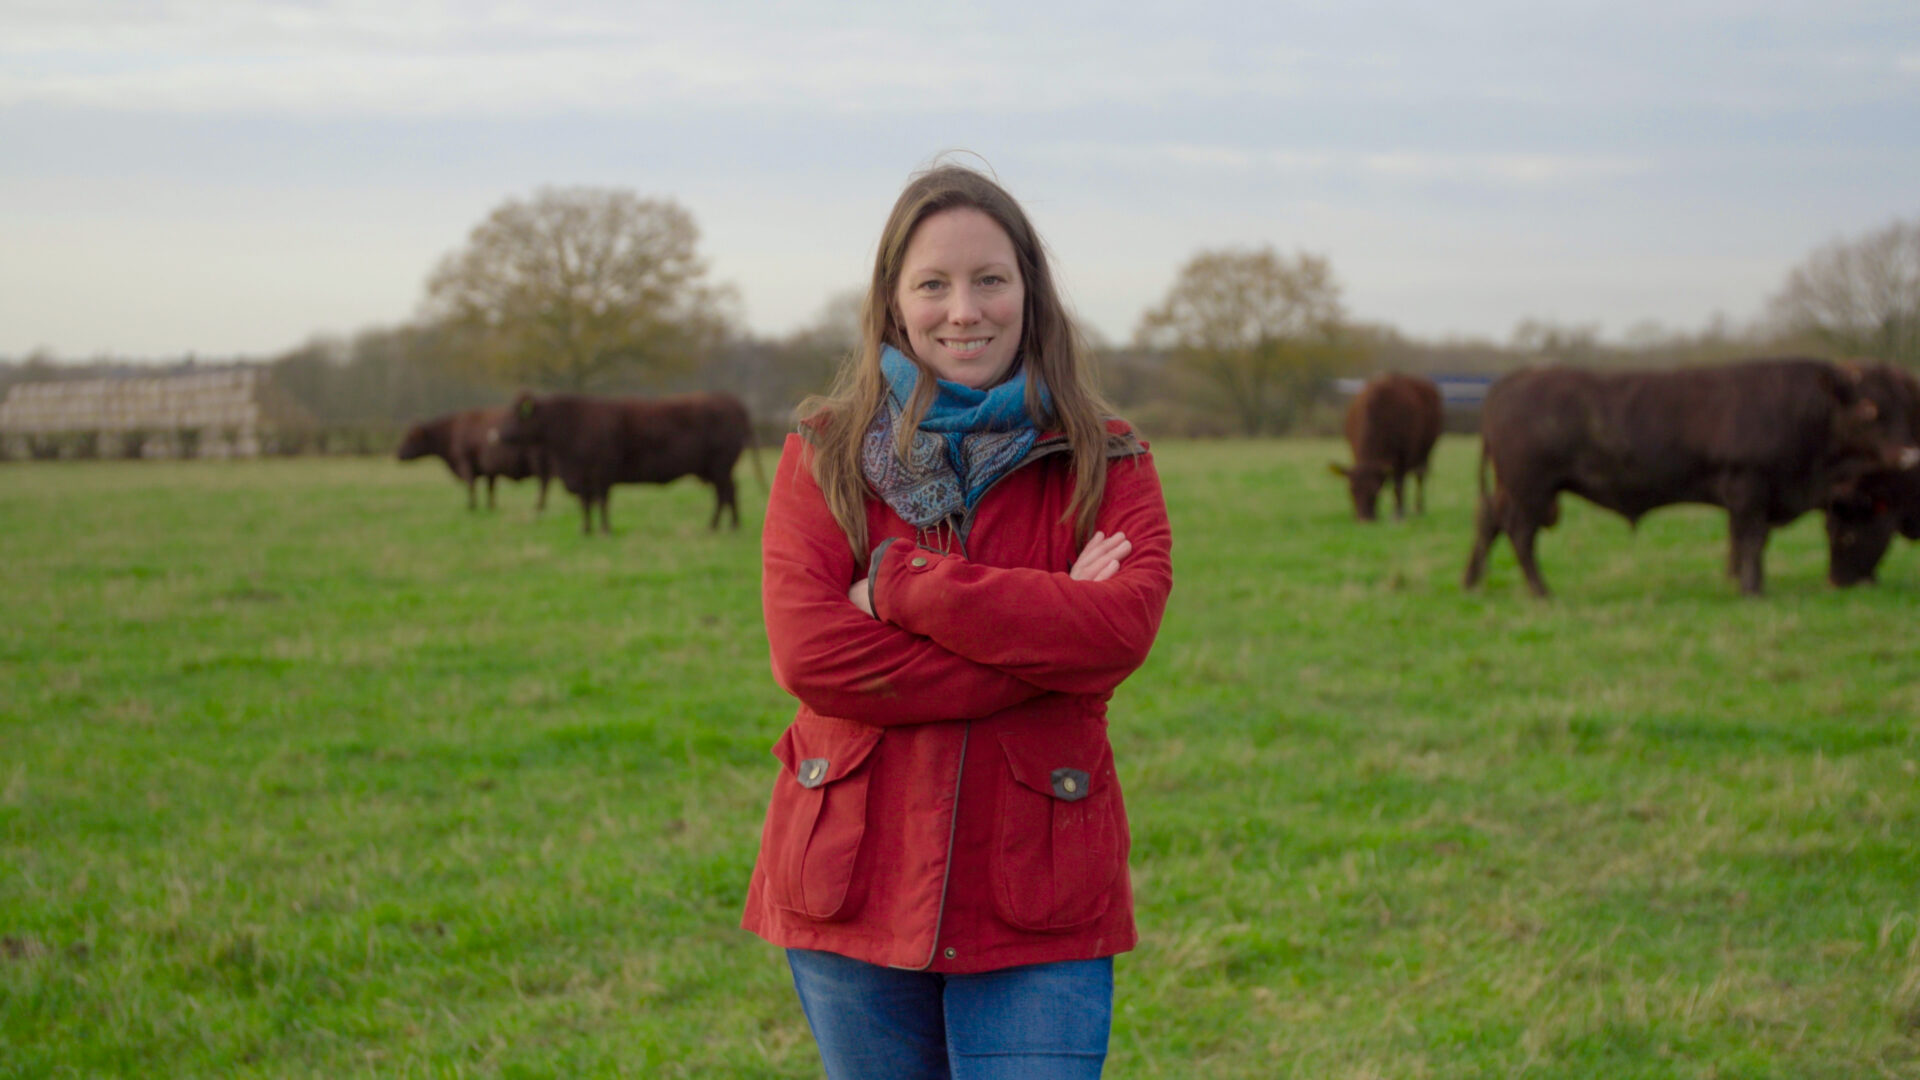 UK livestock farmer Anna Blumfield stood in a field with cows grazing behind her